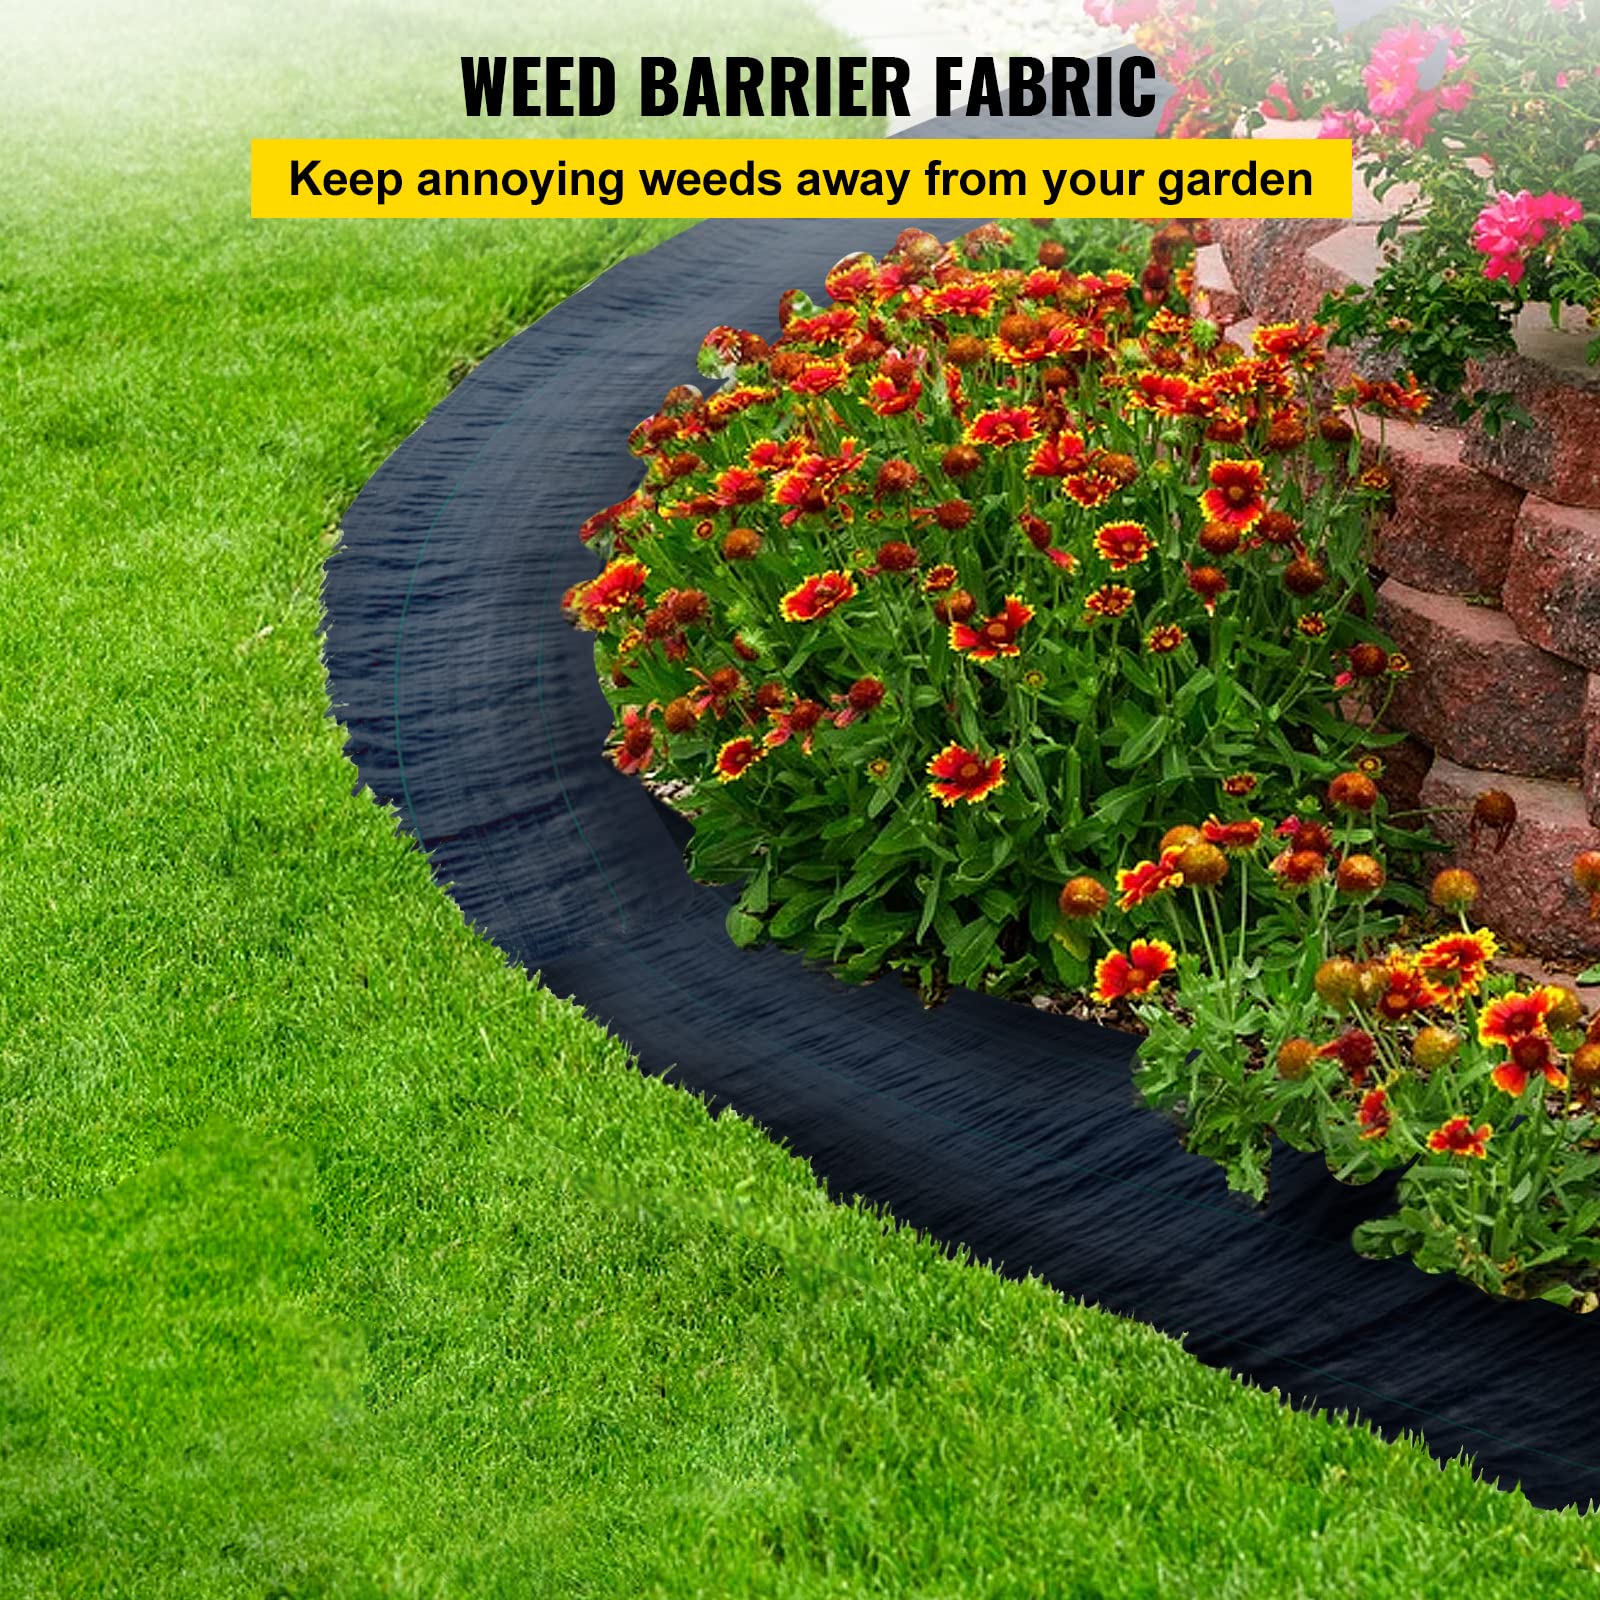 “Weed-Free Wonders: Showcasing Gardens with Impeccable Weed Control”